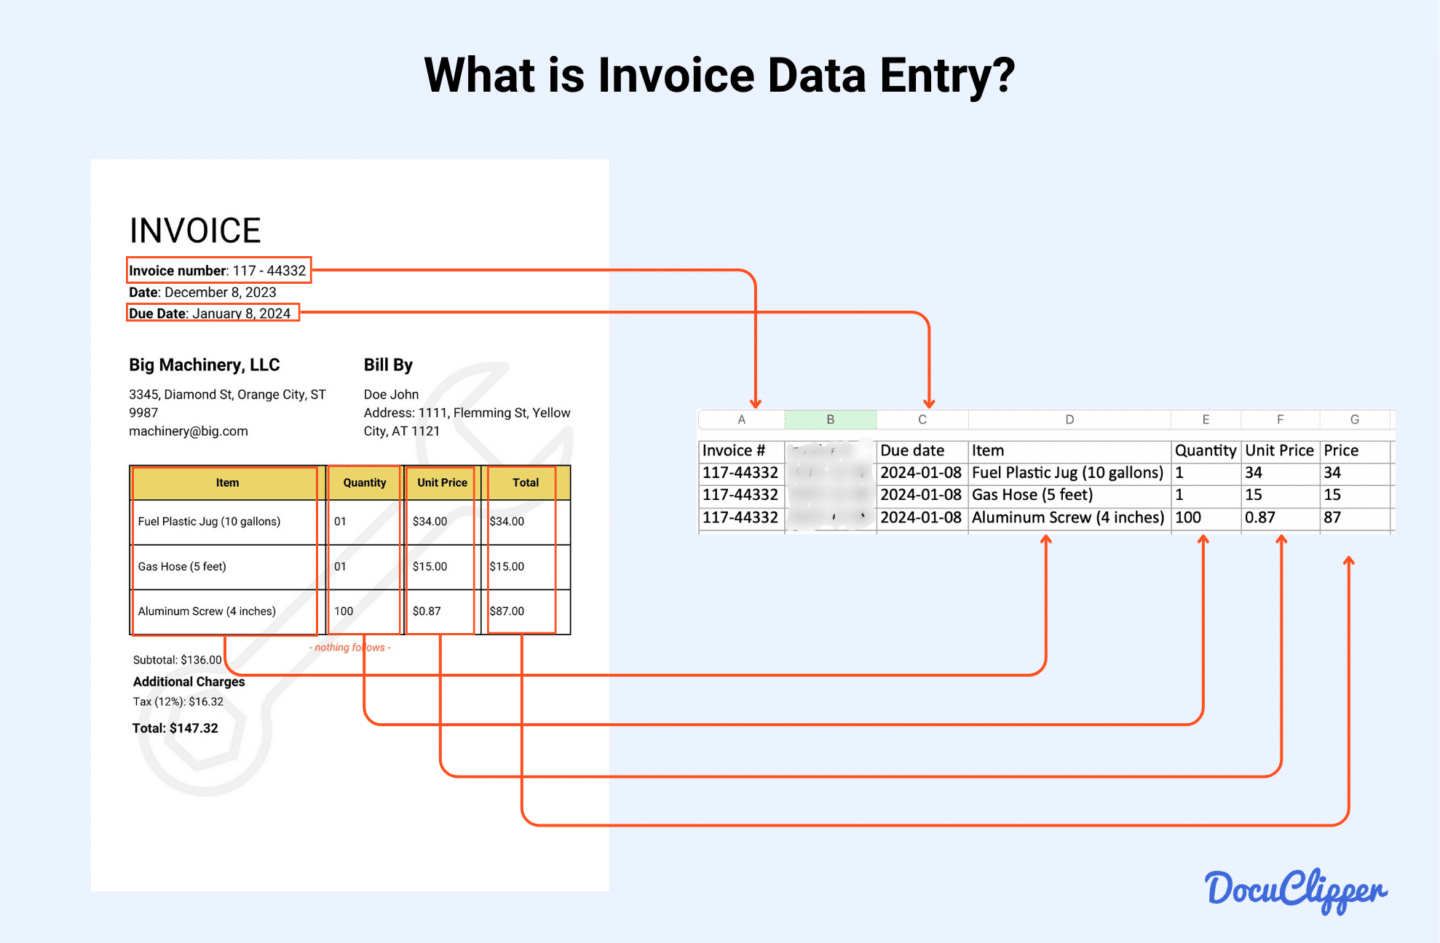 What is Invoice Data Entry